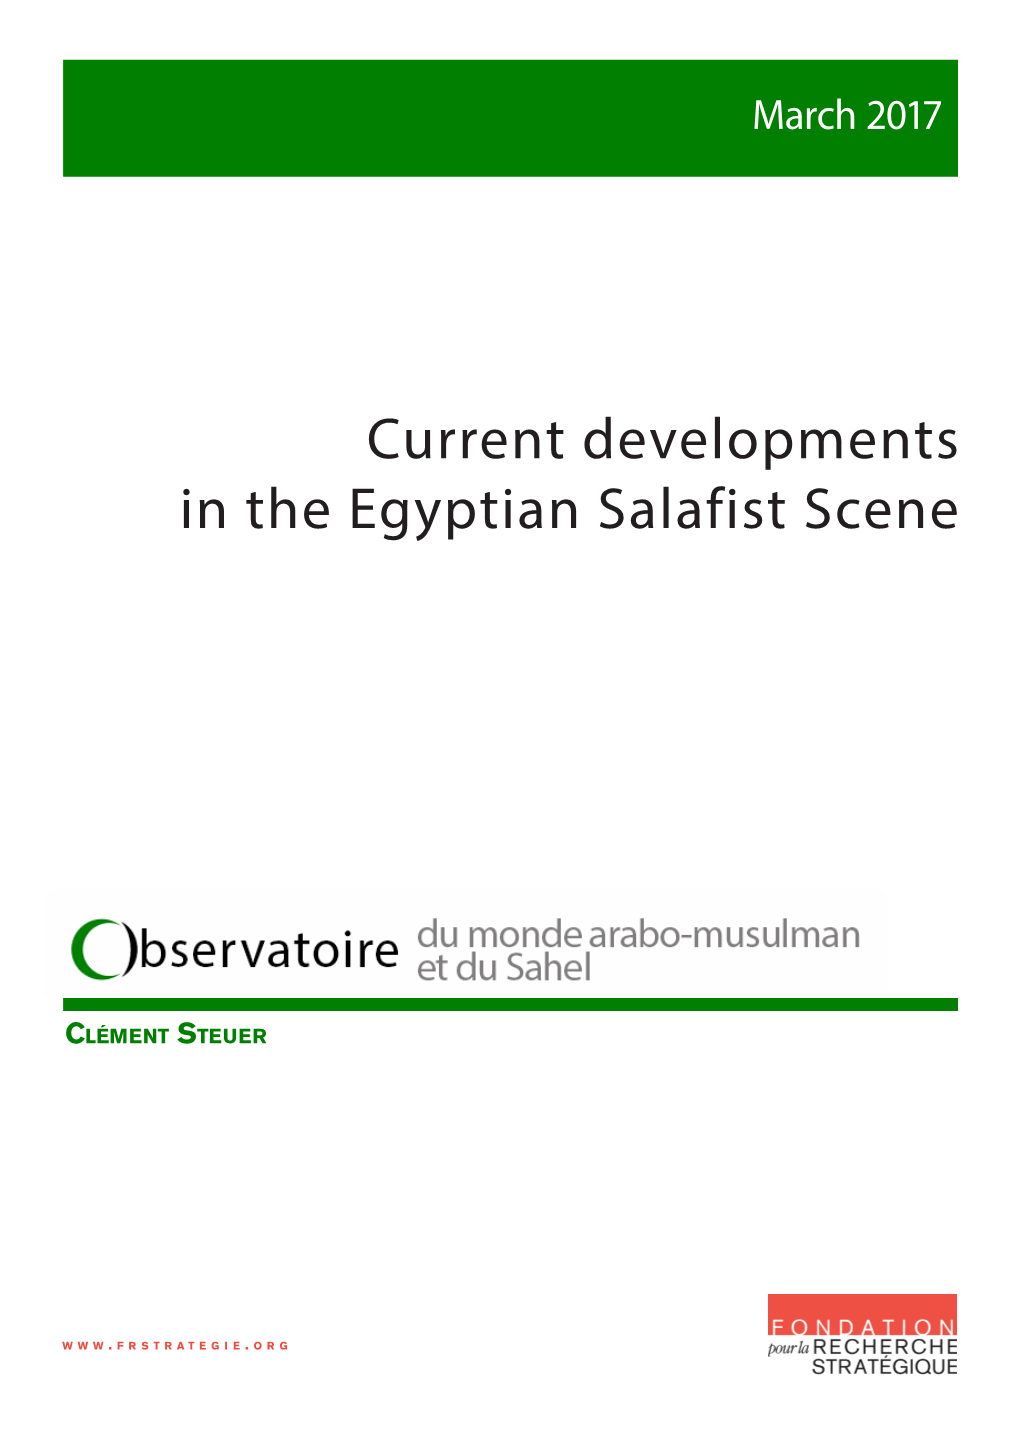 Current Developments in the Egyptian Salafist Scene